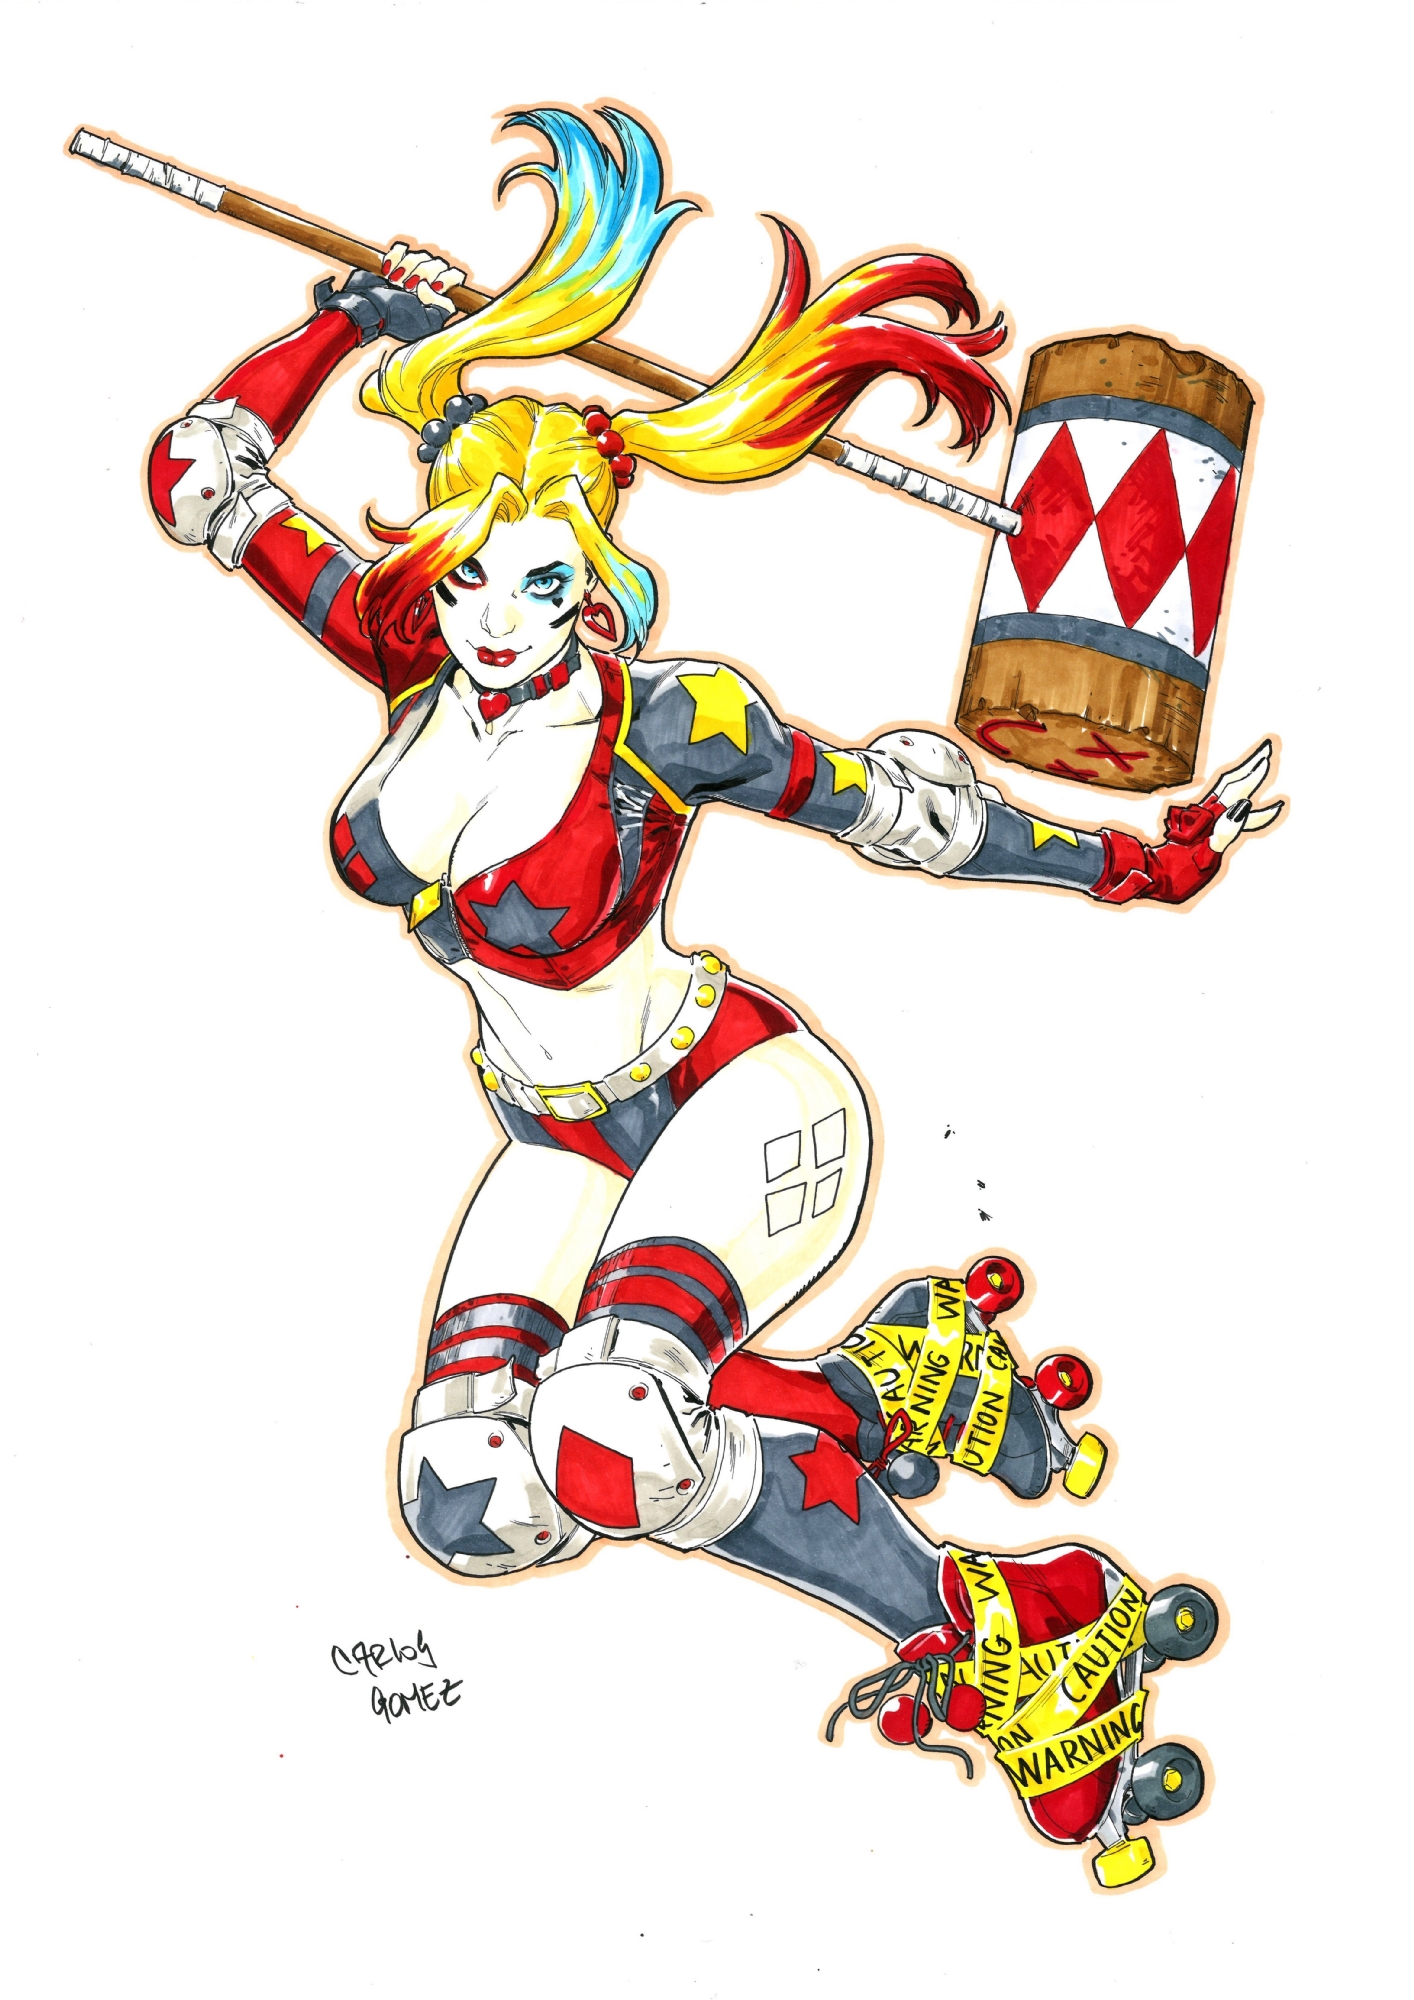 Roller Derby Harley Quinn by Carlos Gomez, in A I's Pin-Ups